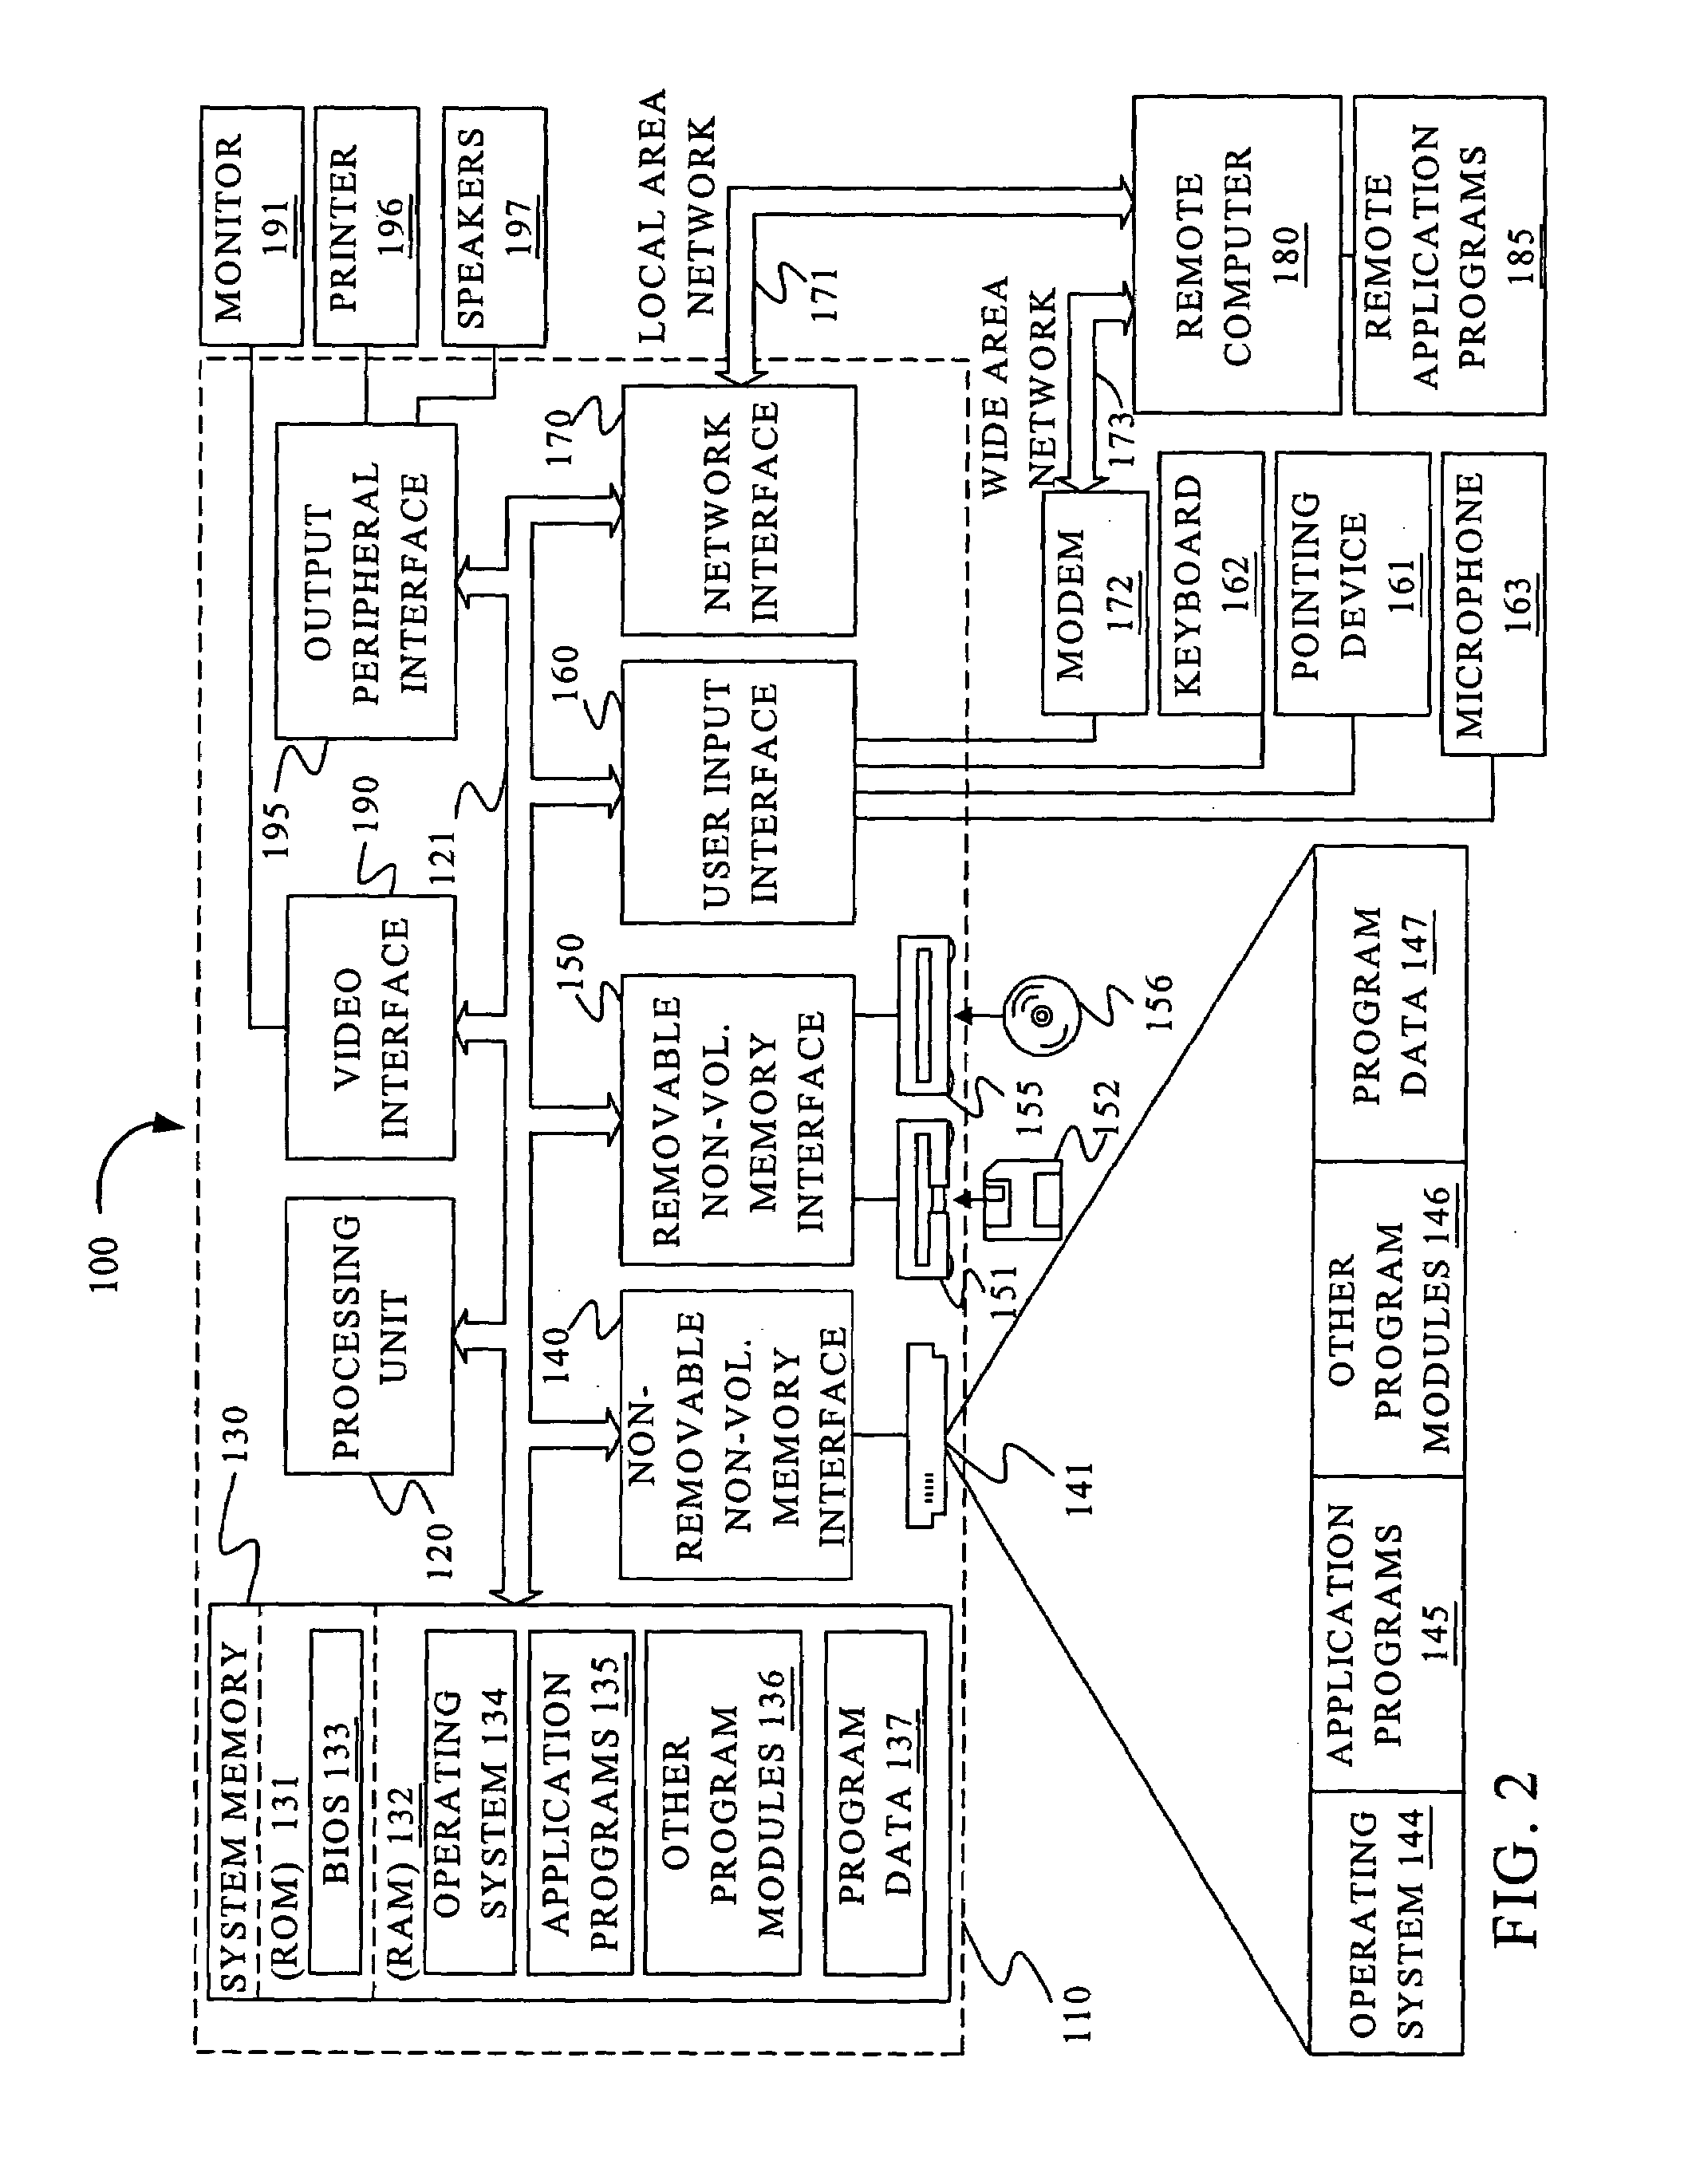 Dynamic filtering in a database system